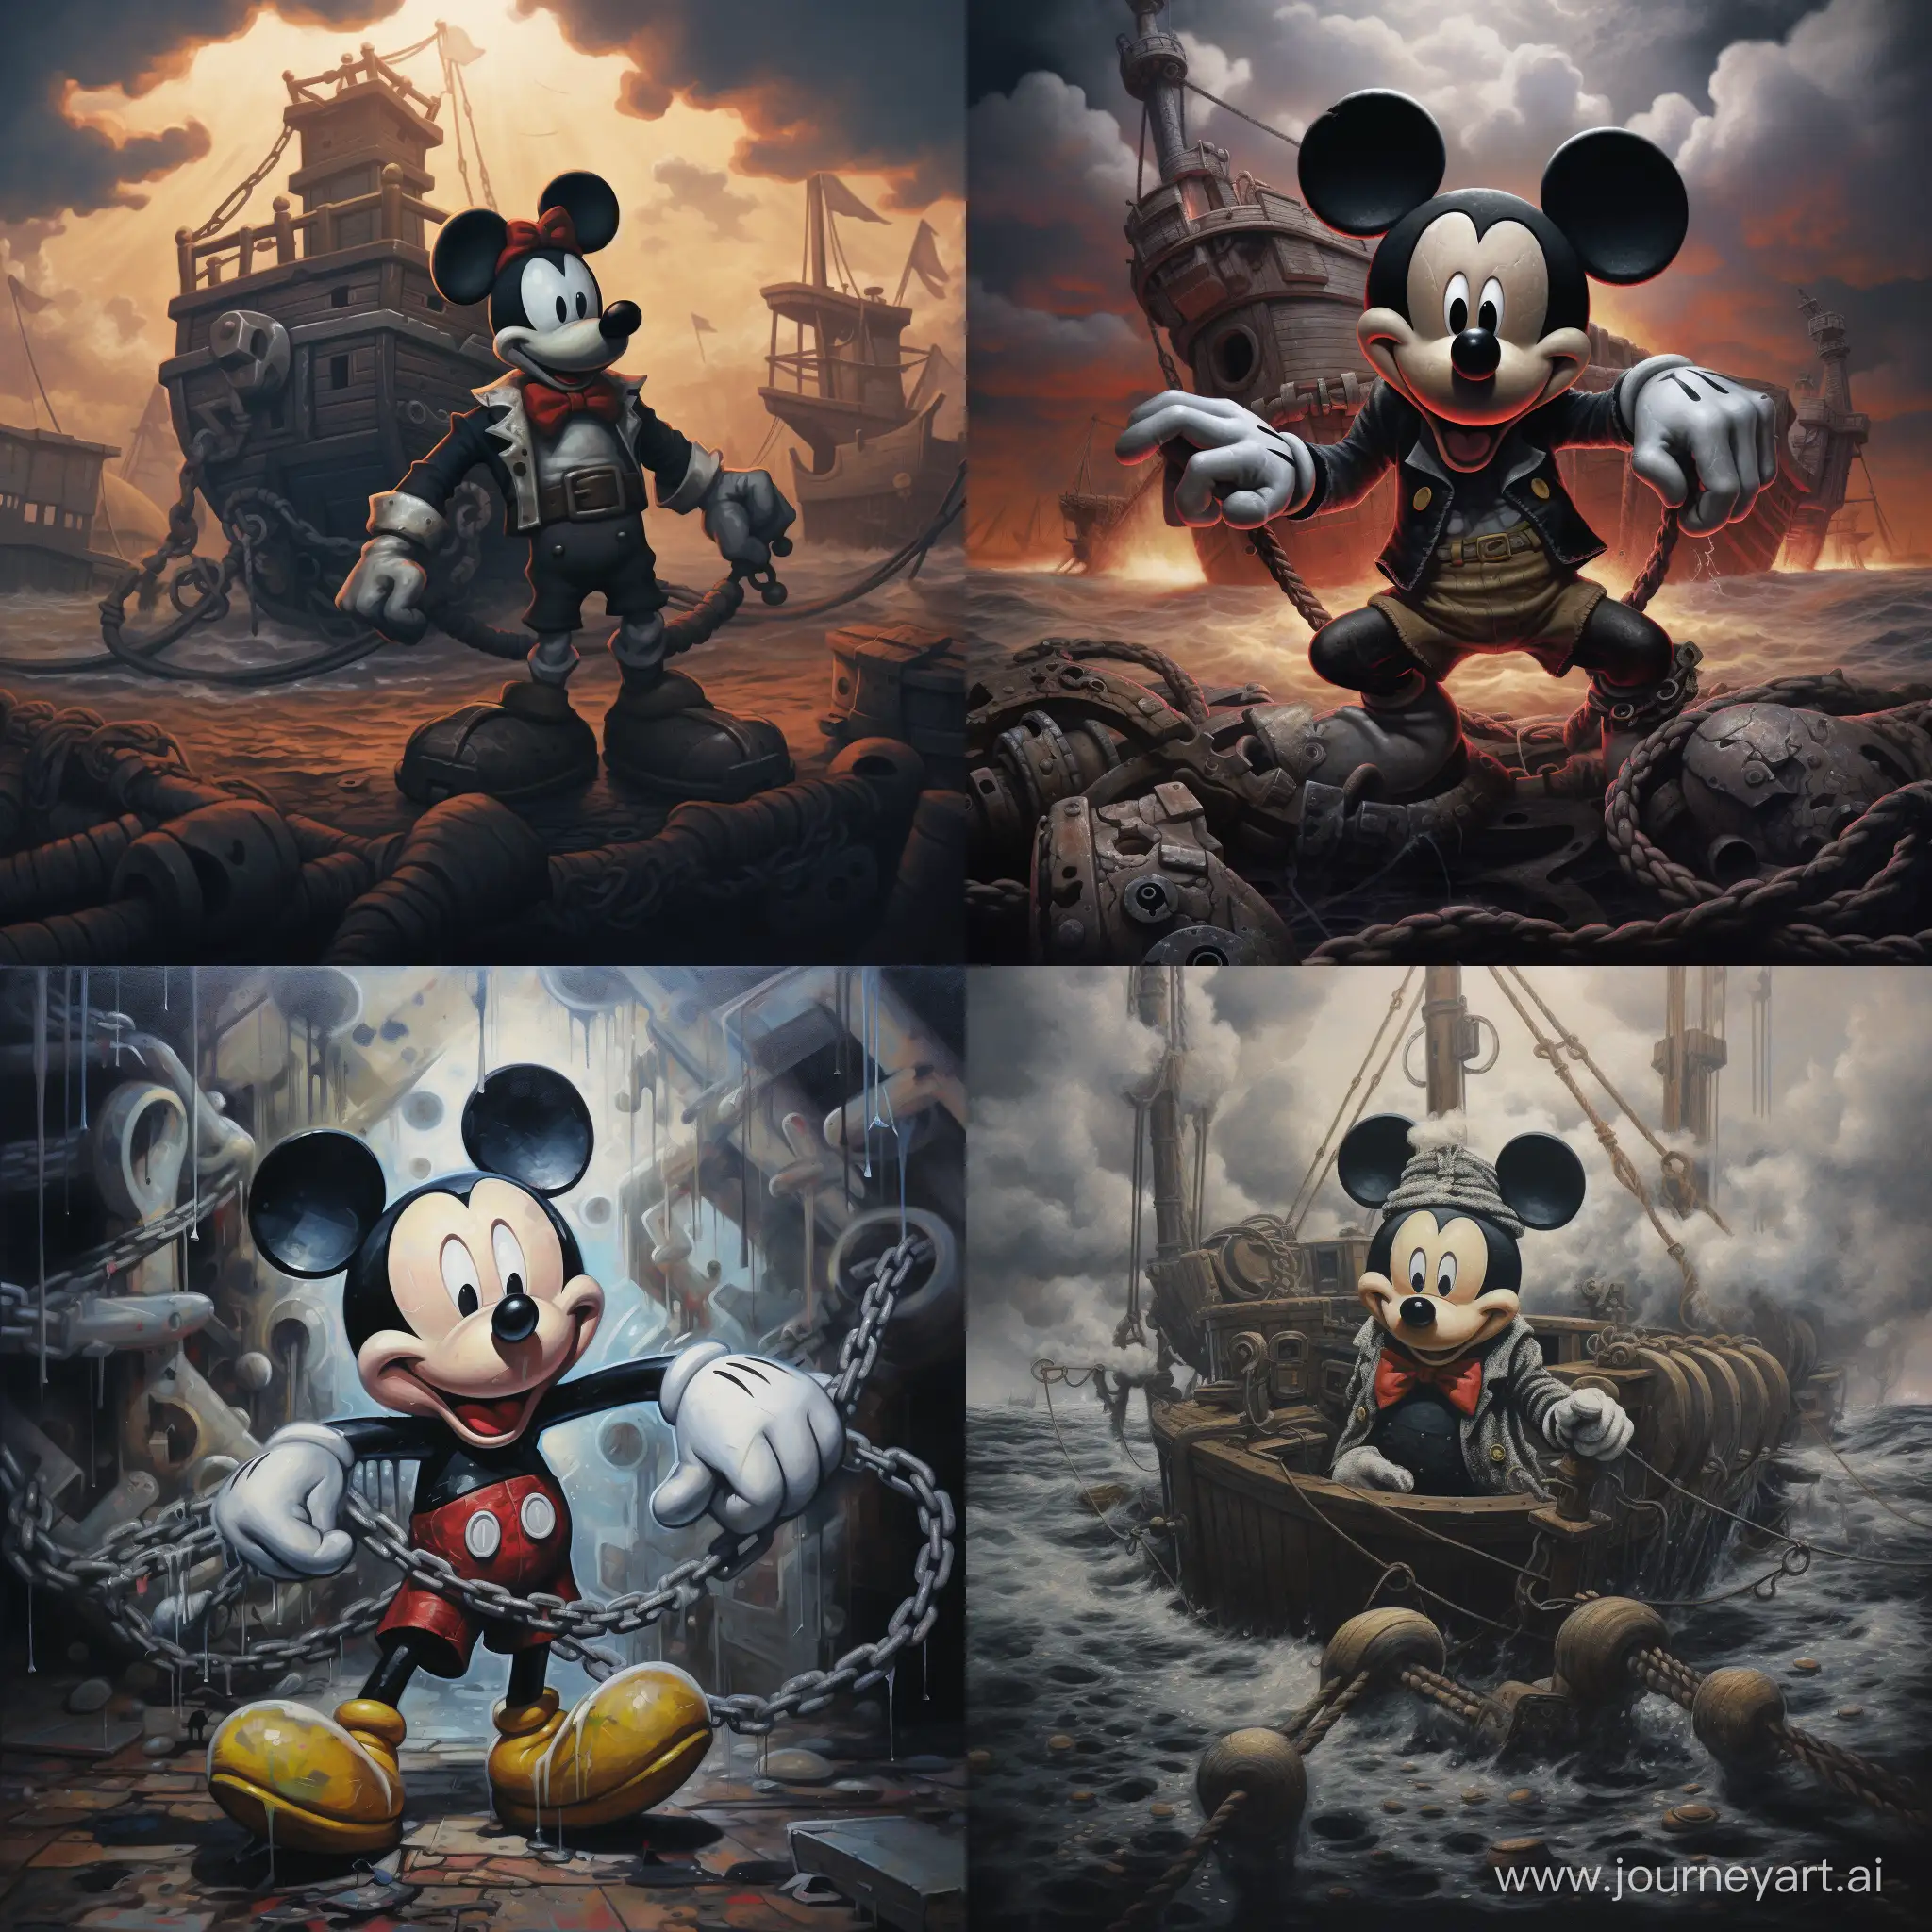 Steamboat Willie unchained